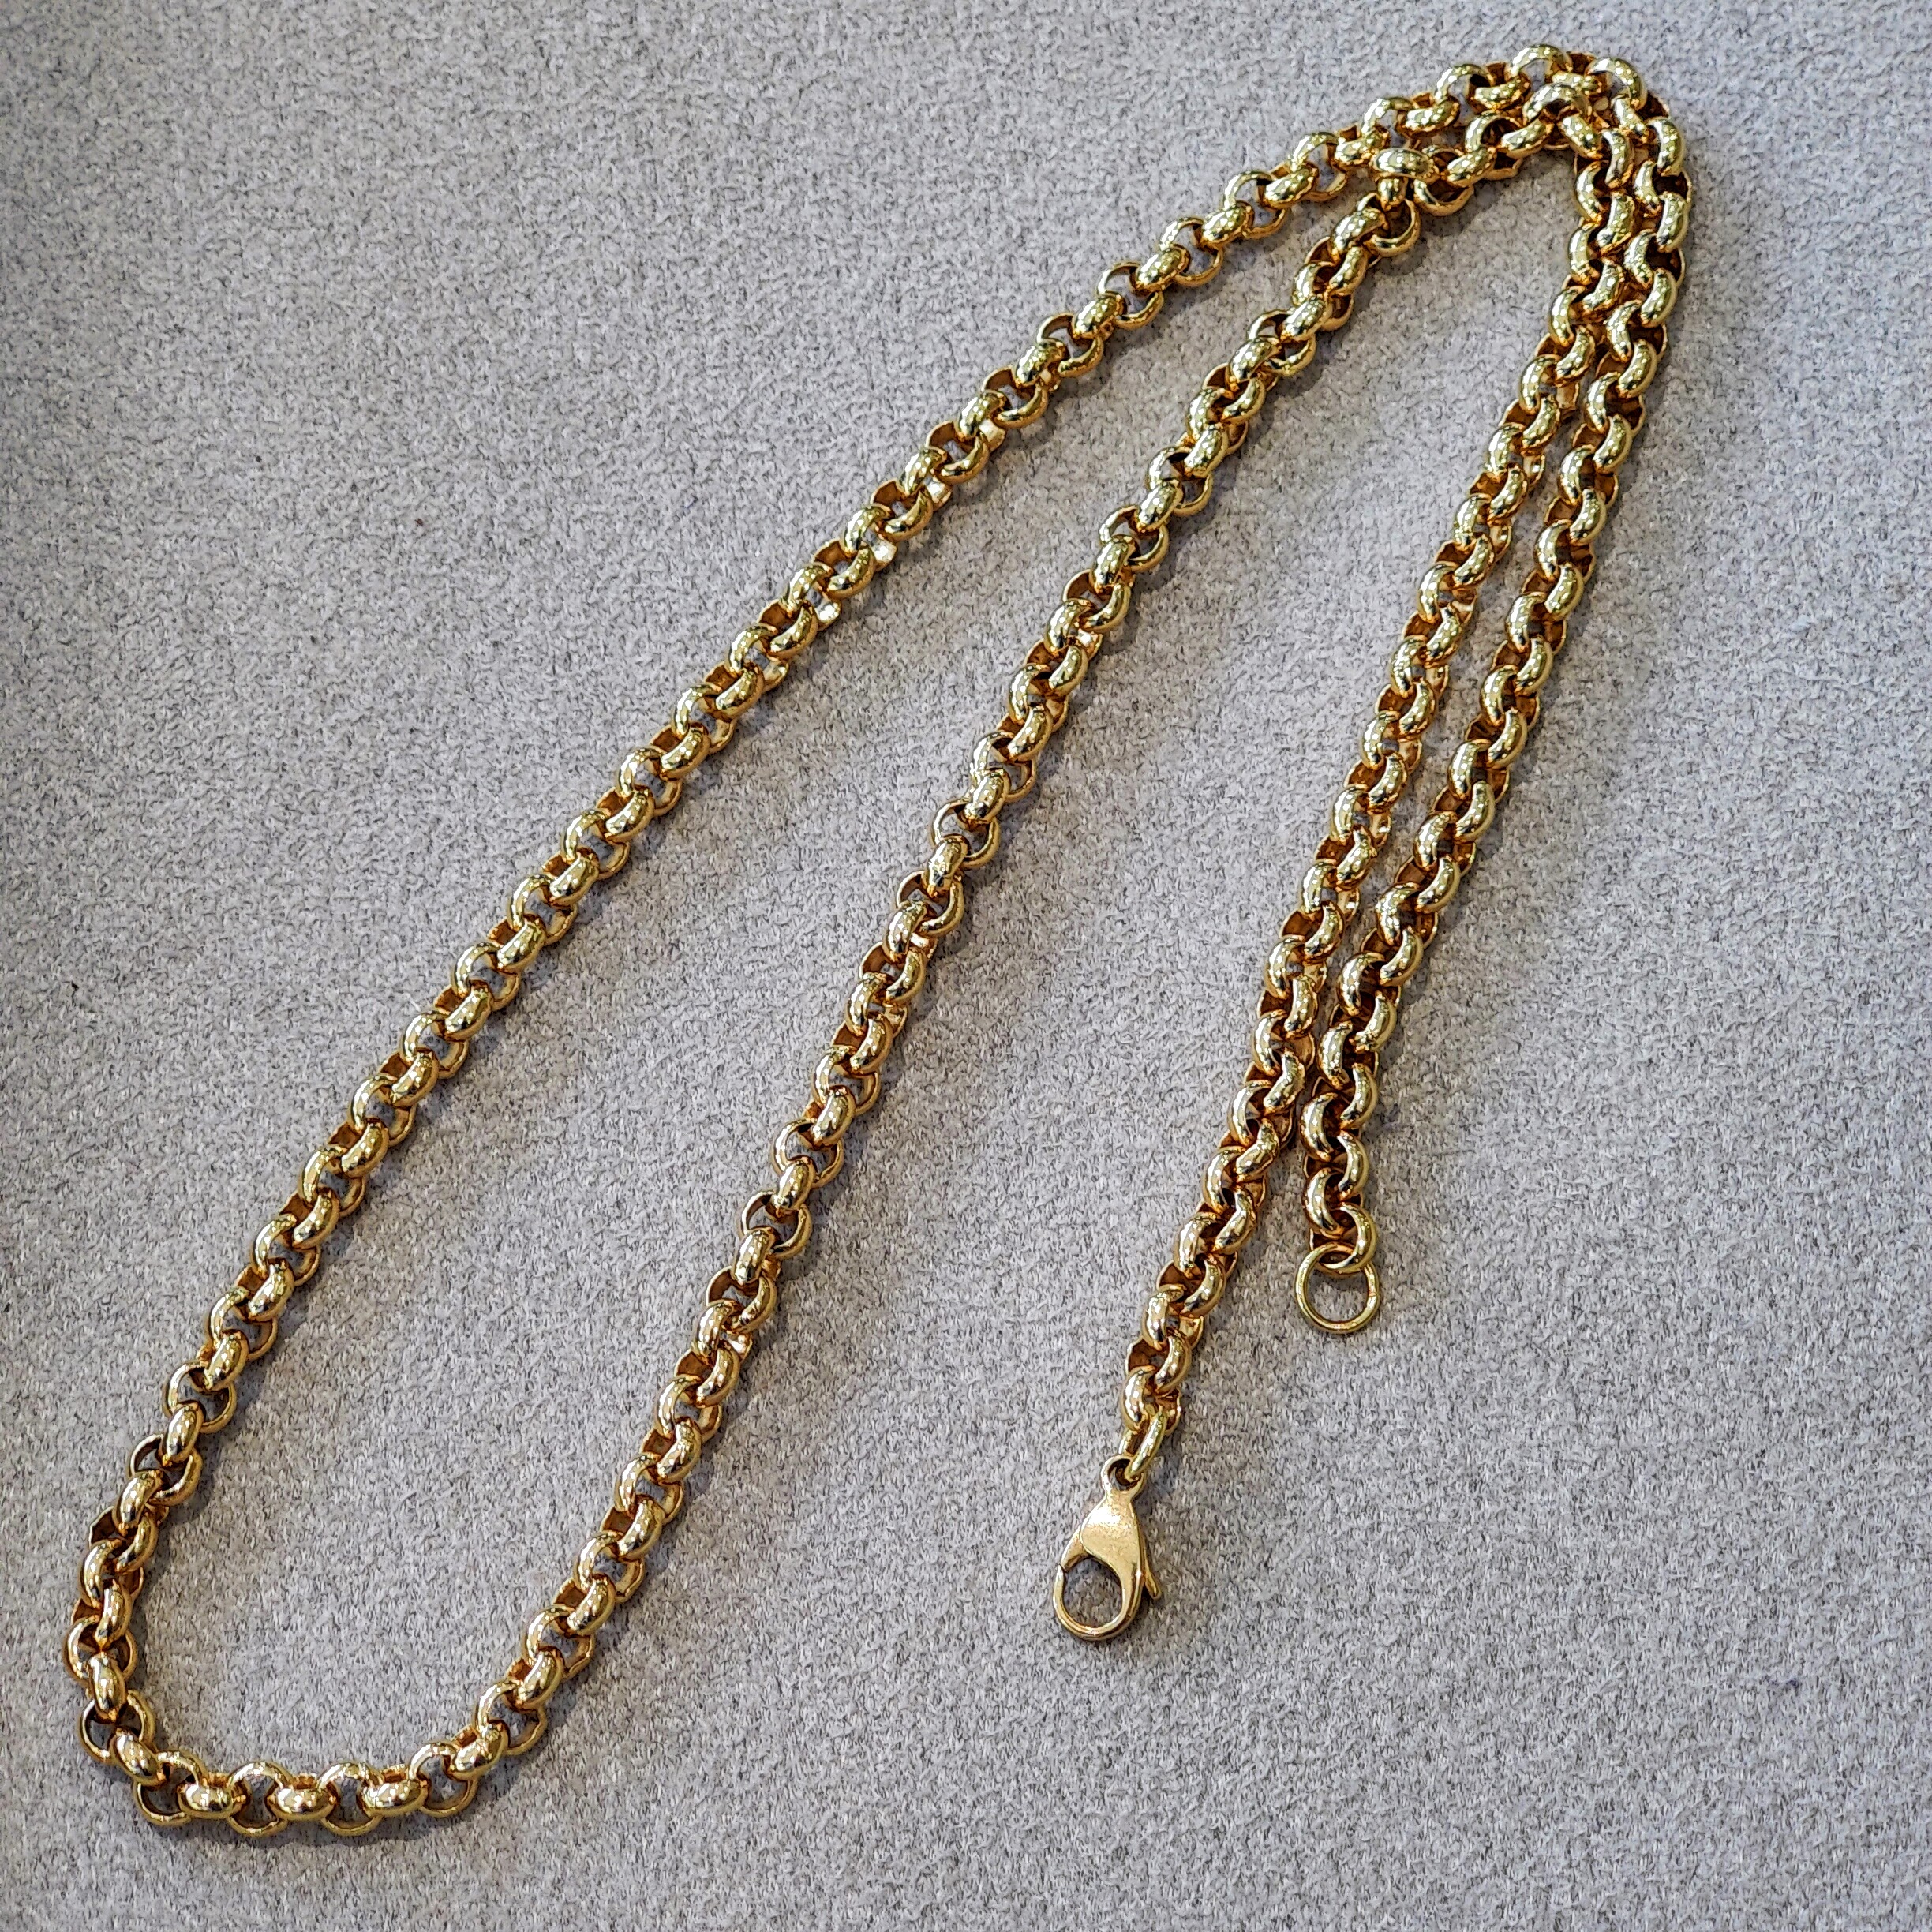 Pre-Loved 18ct Yellow Gold Belcher Chain - 20 Inches - Charles Nobel